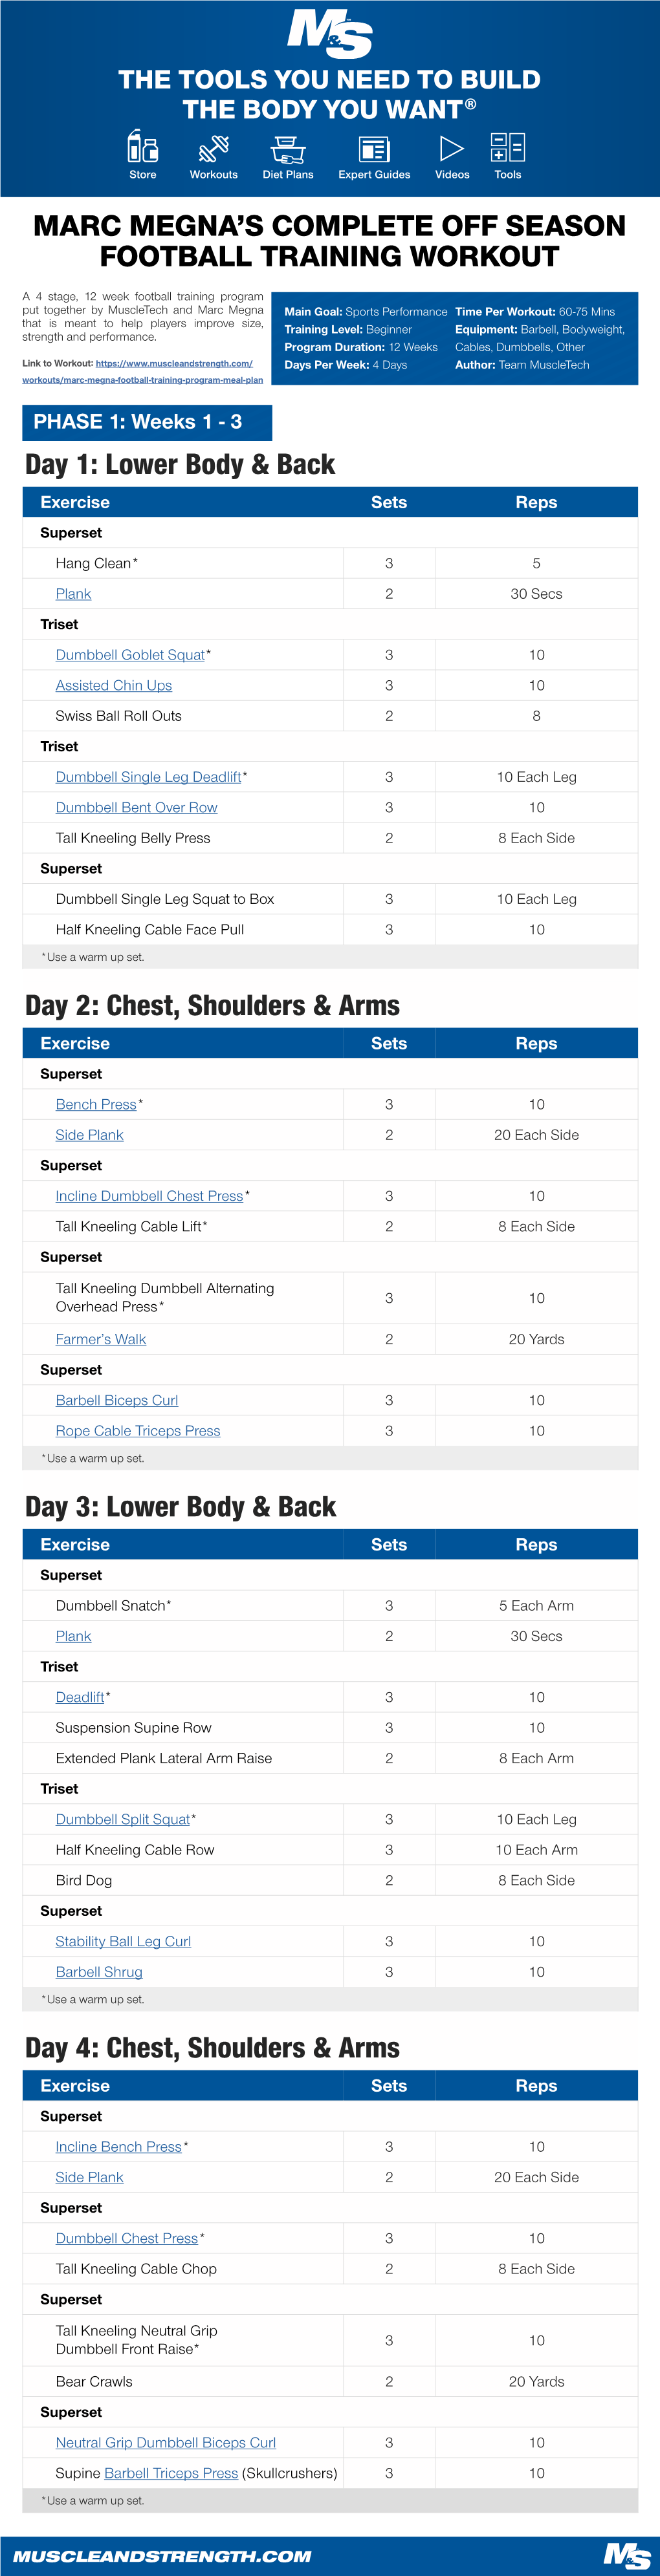 Download Workout